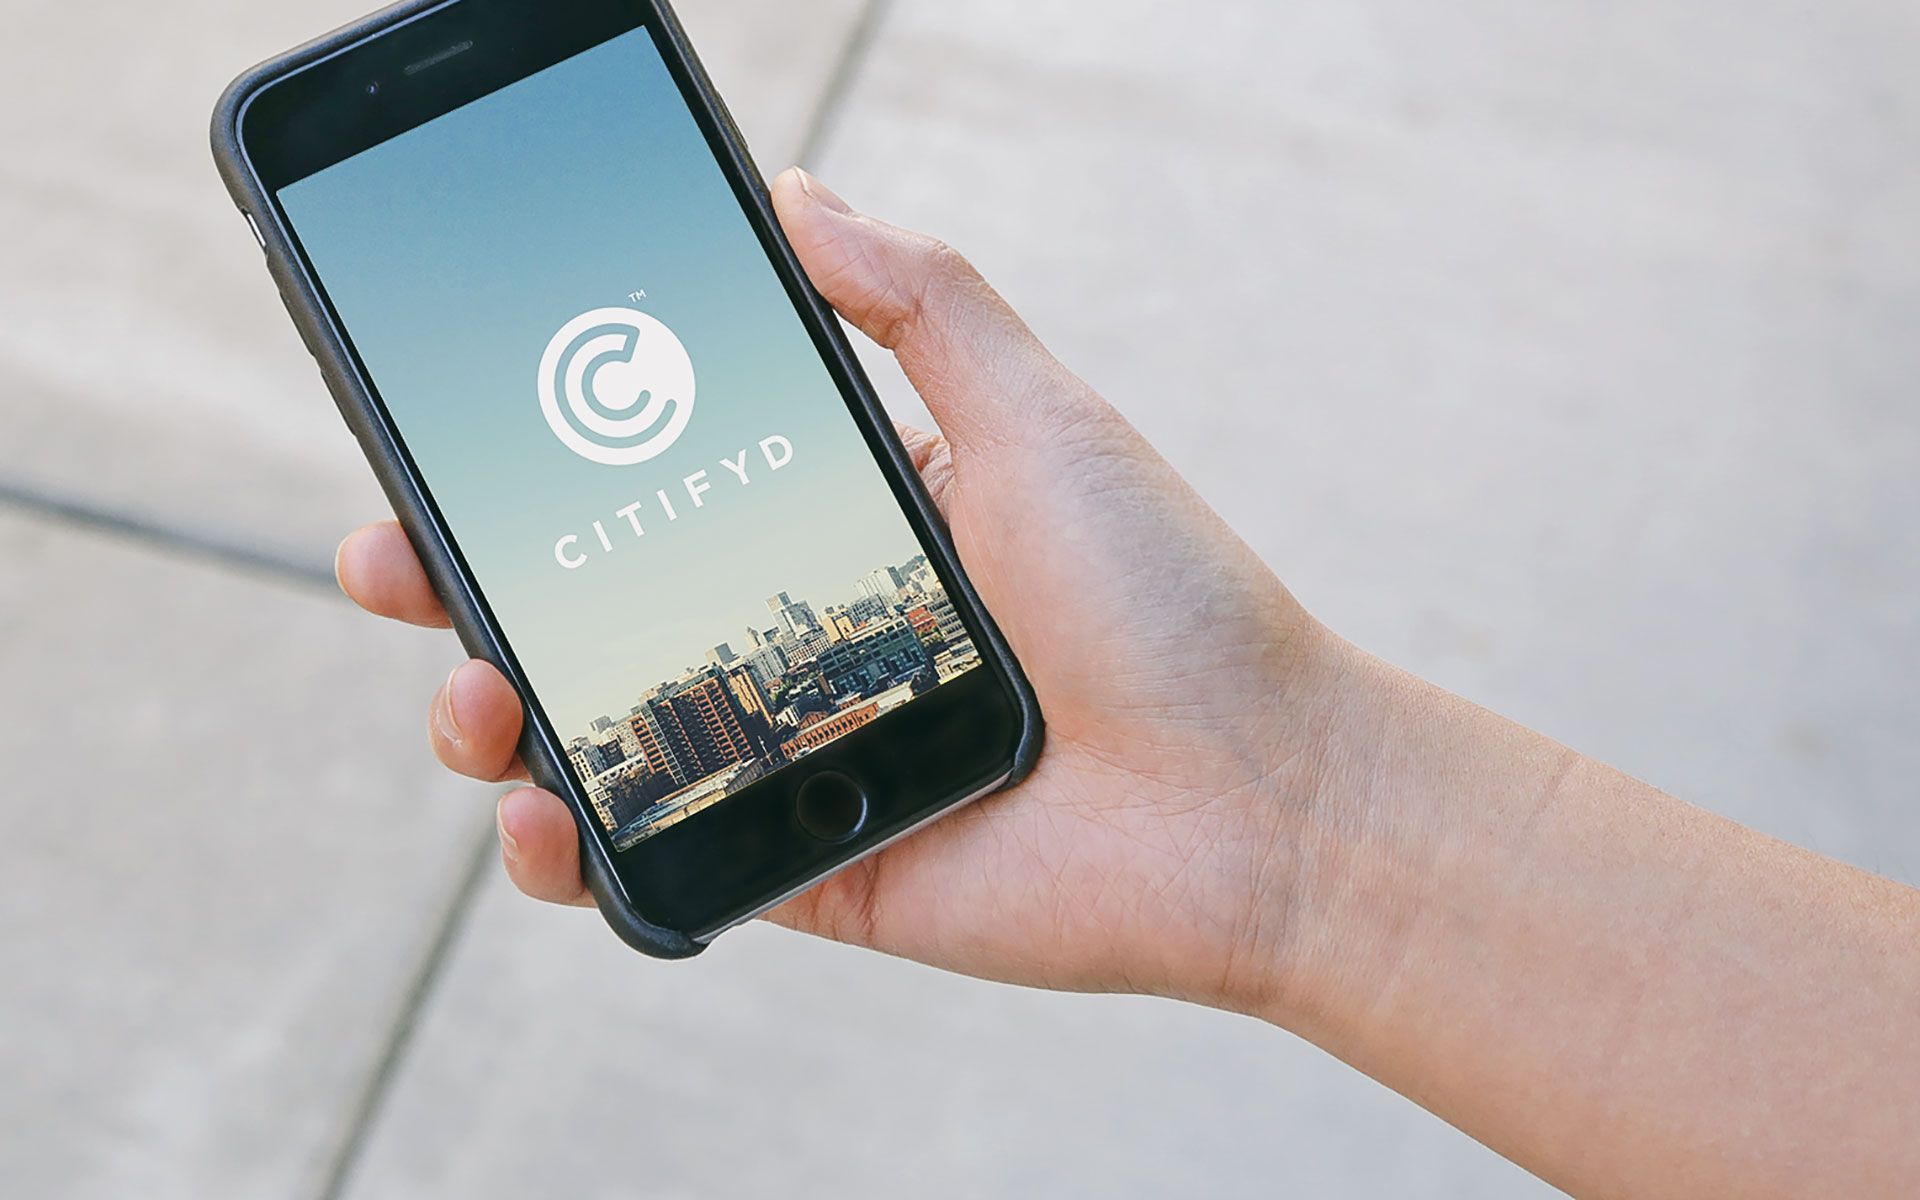 Hand holding a mobile phone with an image of a city skyline and the Citifyd logo